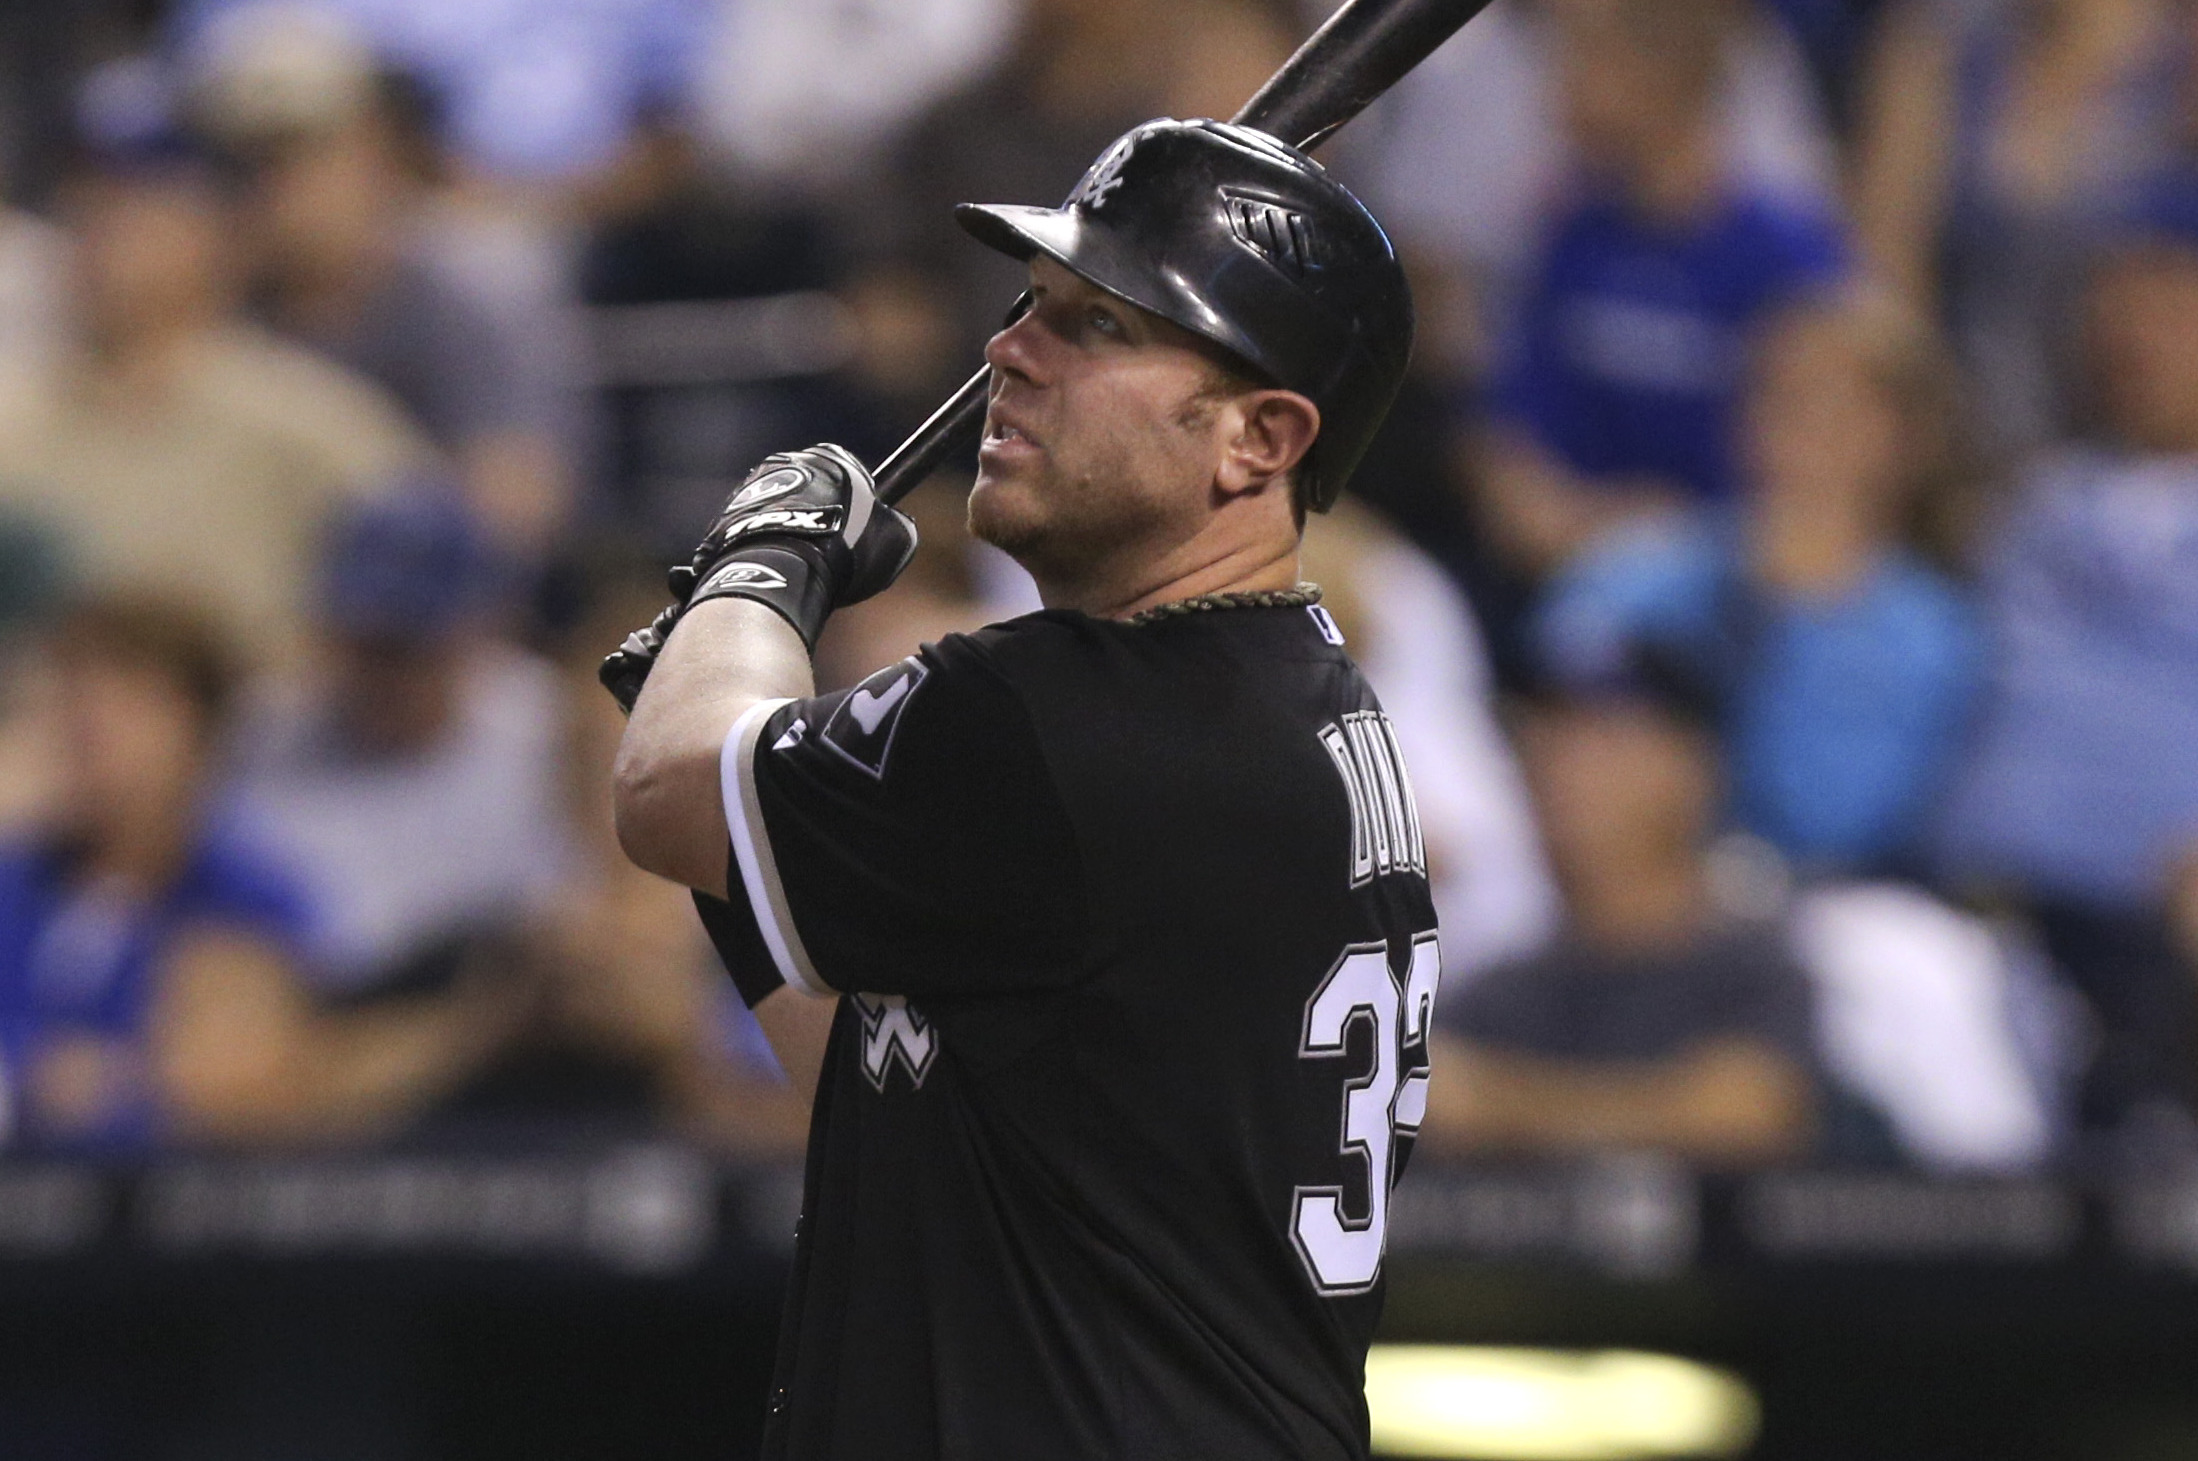 Athletics' move for Adam Dunn helps lineup depth, restores team power -  Sports Illustrated